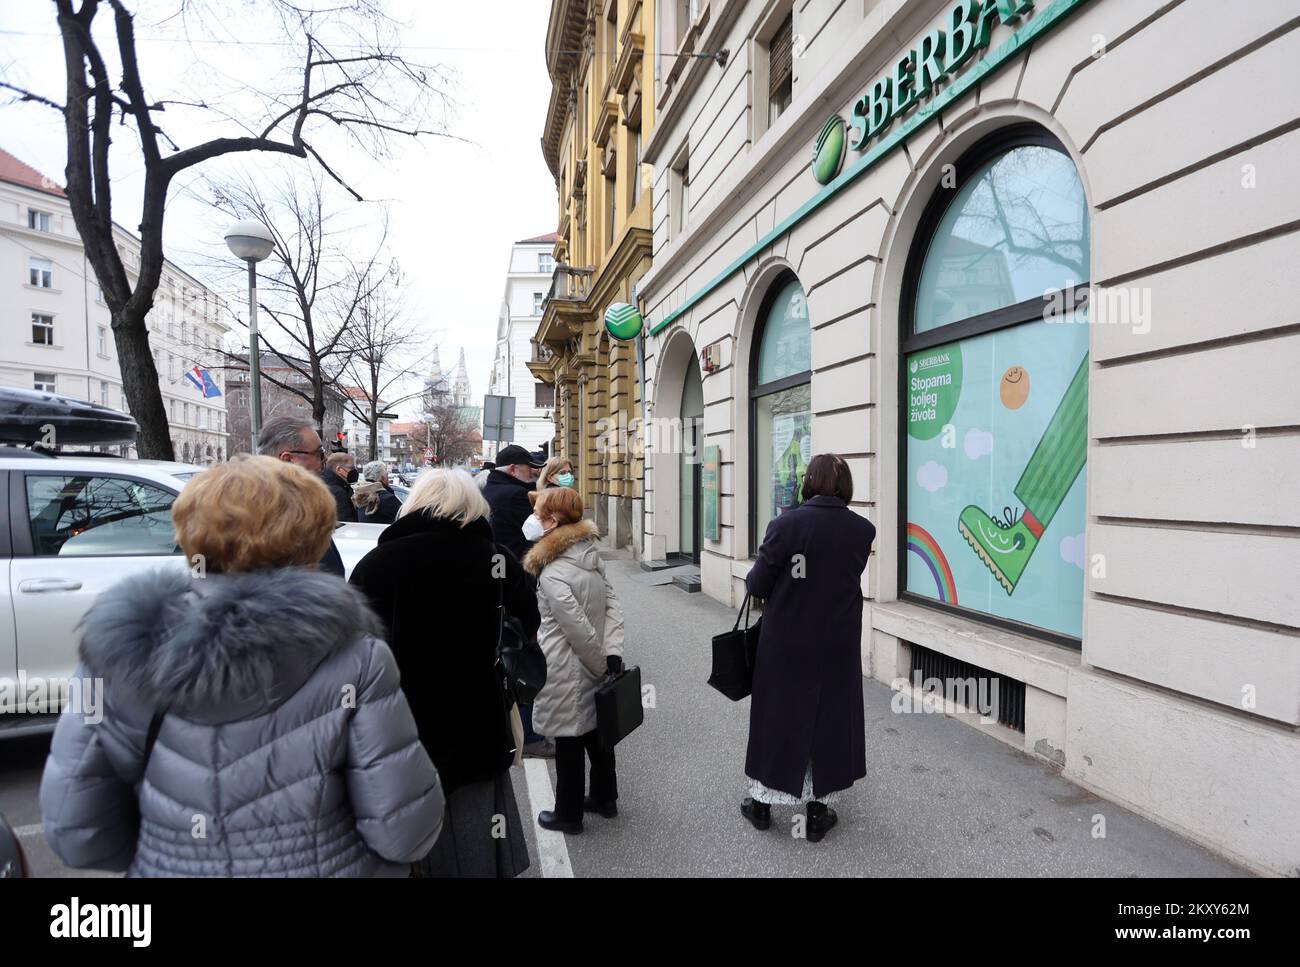 Citizens are waiting in line in front of the Russian bank Sberbank in Zagreb, Croatia on February 25, 2022. Yesterday's attack by Russia on Ukraine caused concern in all areas of life, as well as in the field of deposit insurance, especially in relation to Russian banks operating in the territory of the Republic of Croatia. Photo: Marko Prpic/PIXSELL Stock Photo